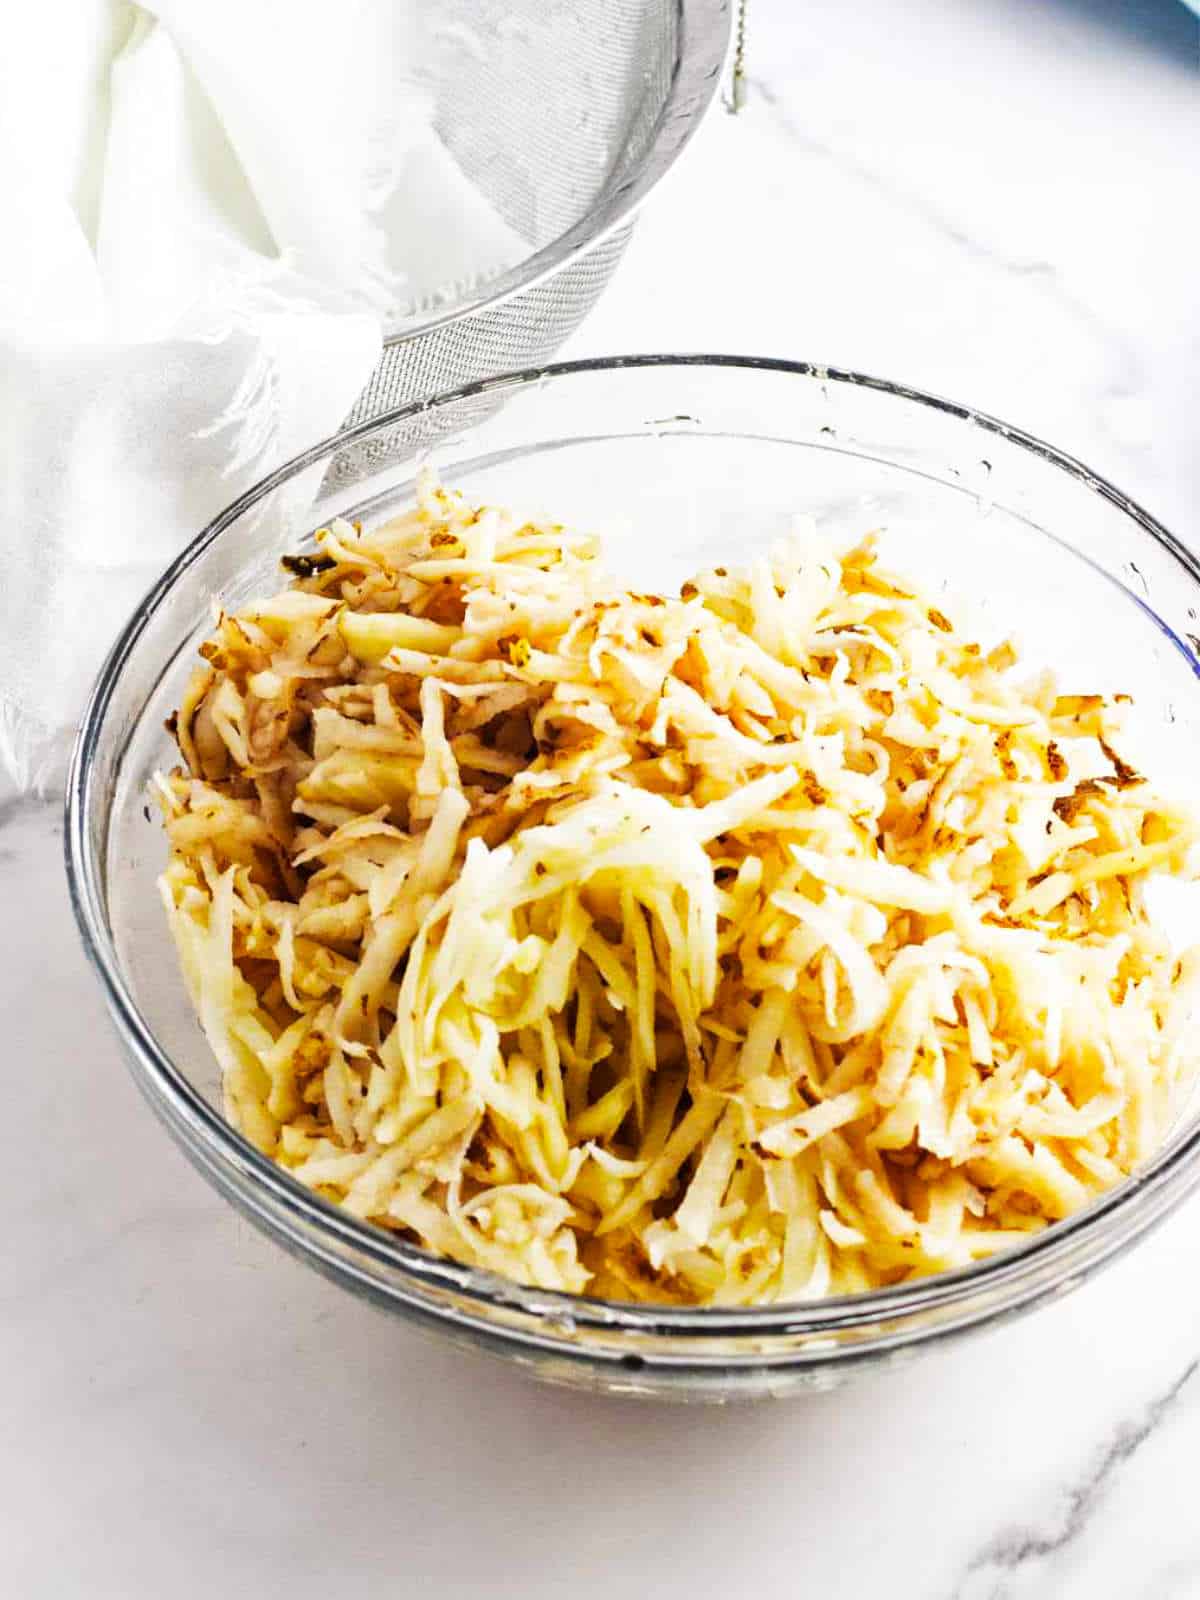 Shredded potatoes in a mixing bowl.